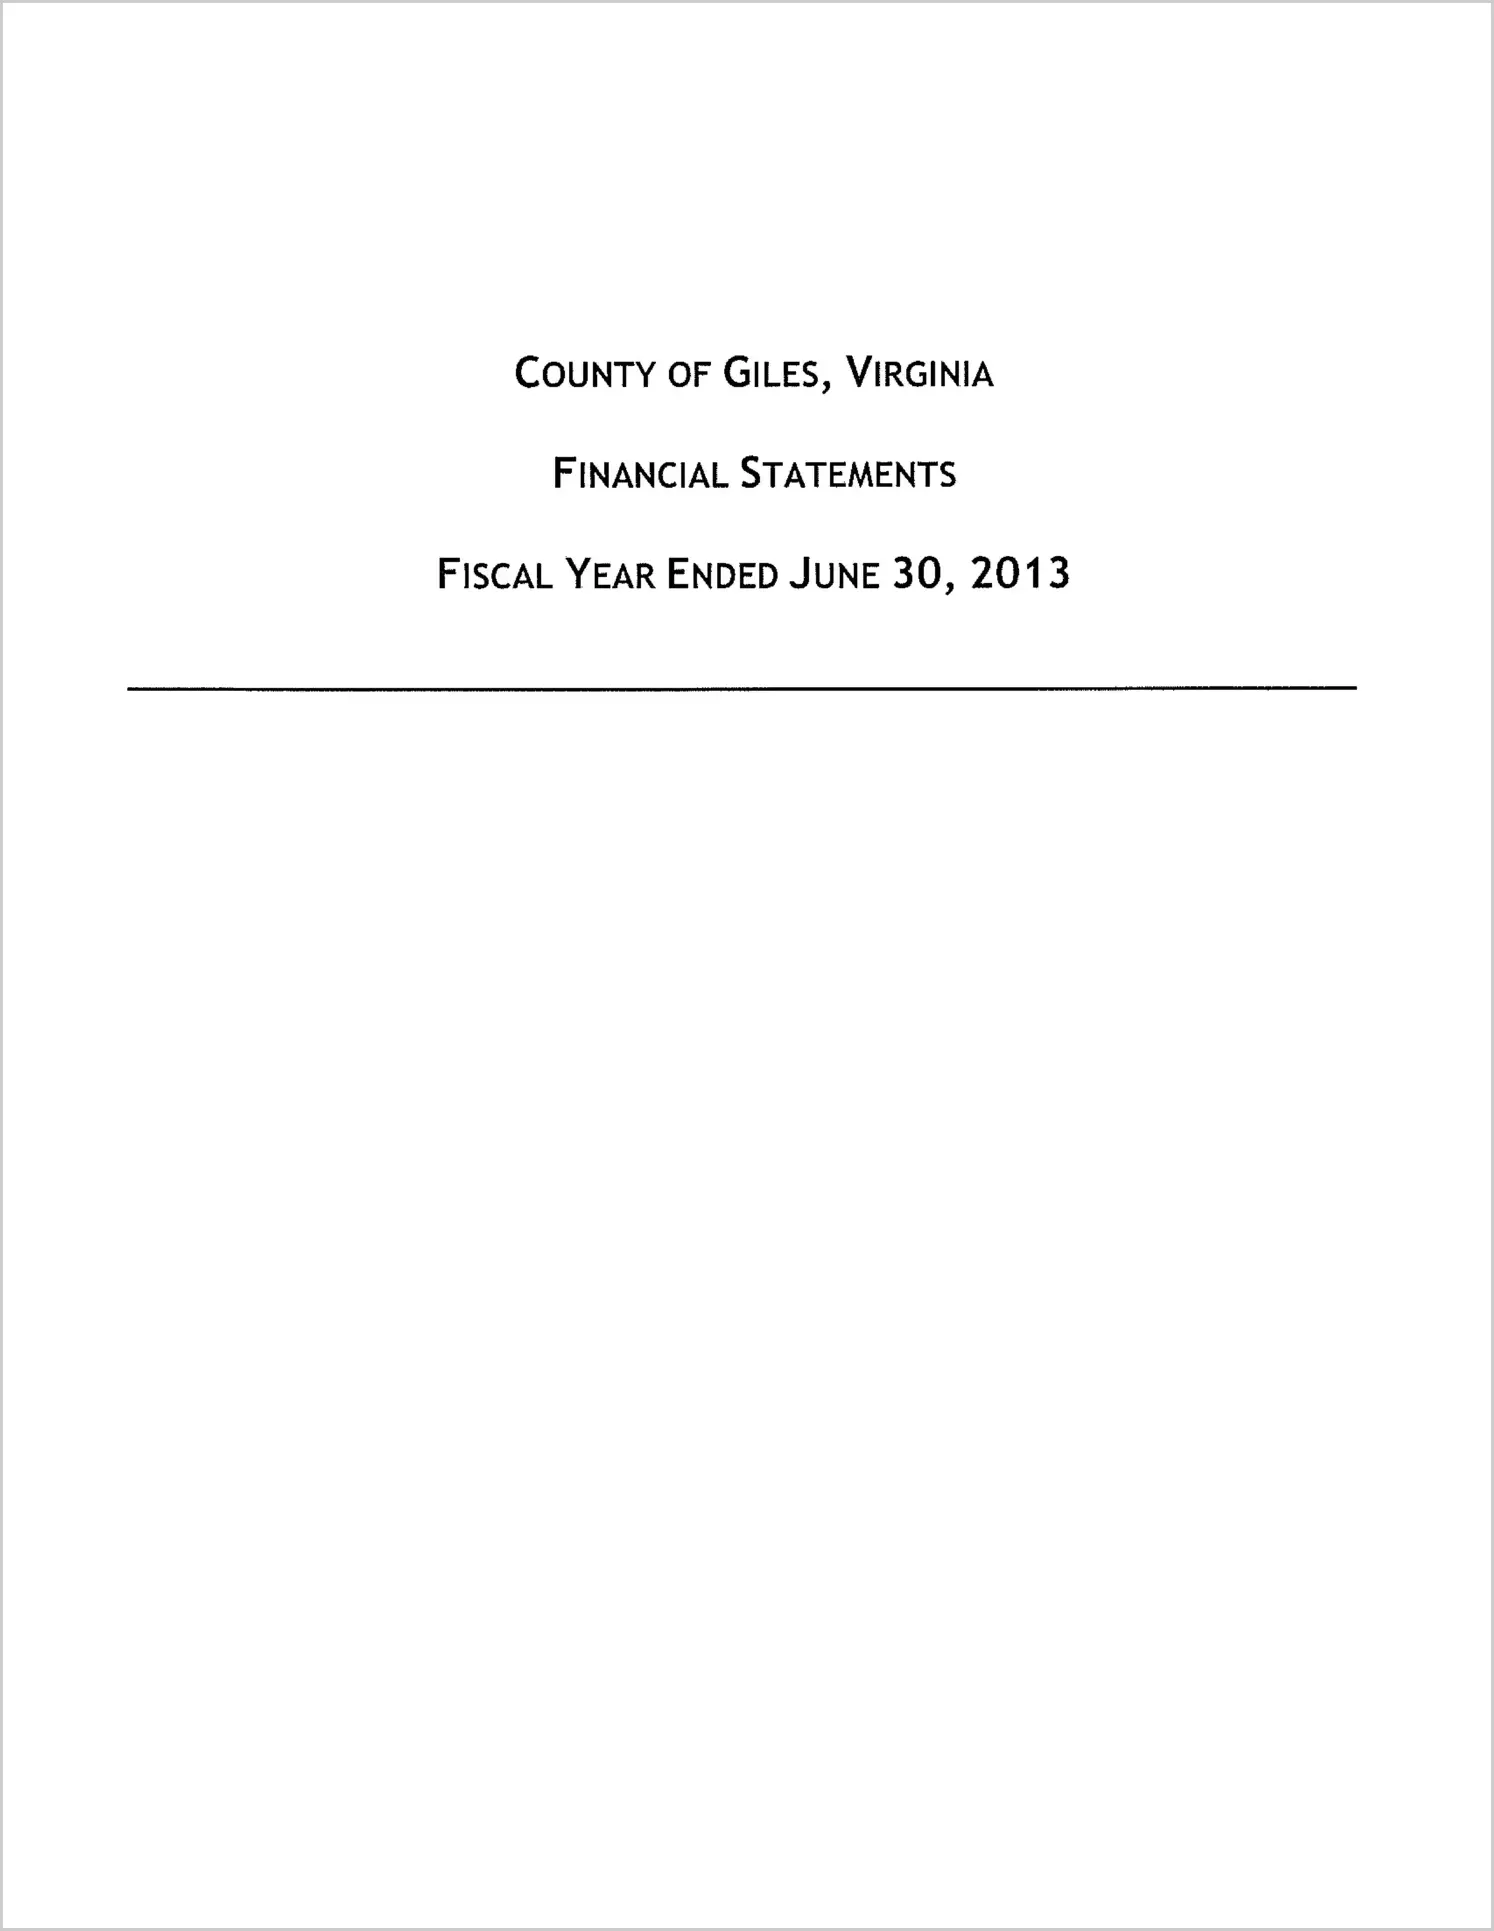 2013 Annual Financial Report for County of Giles